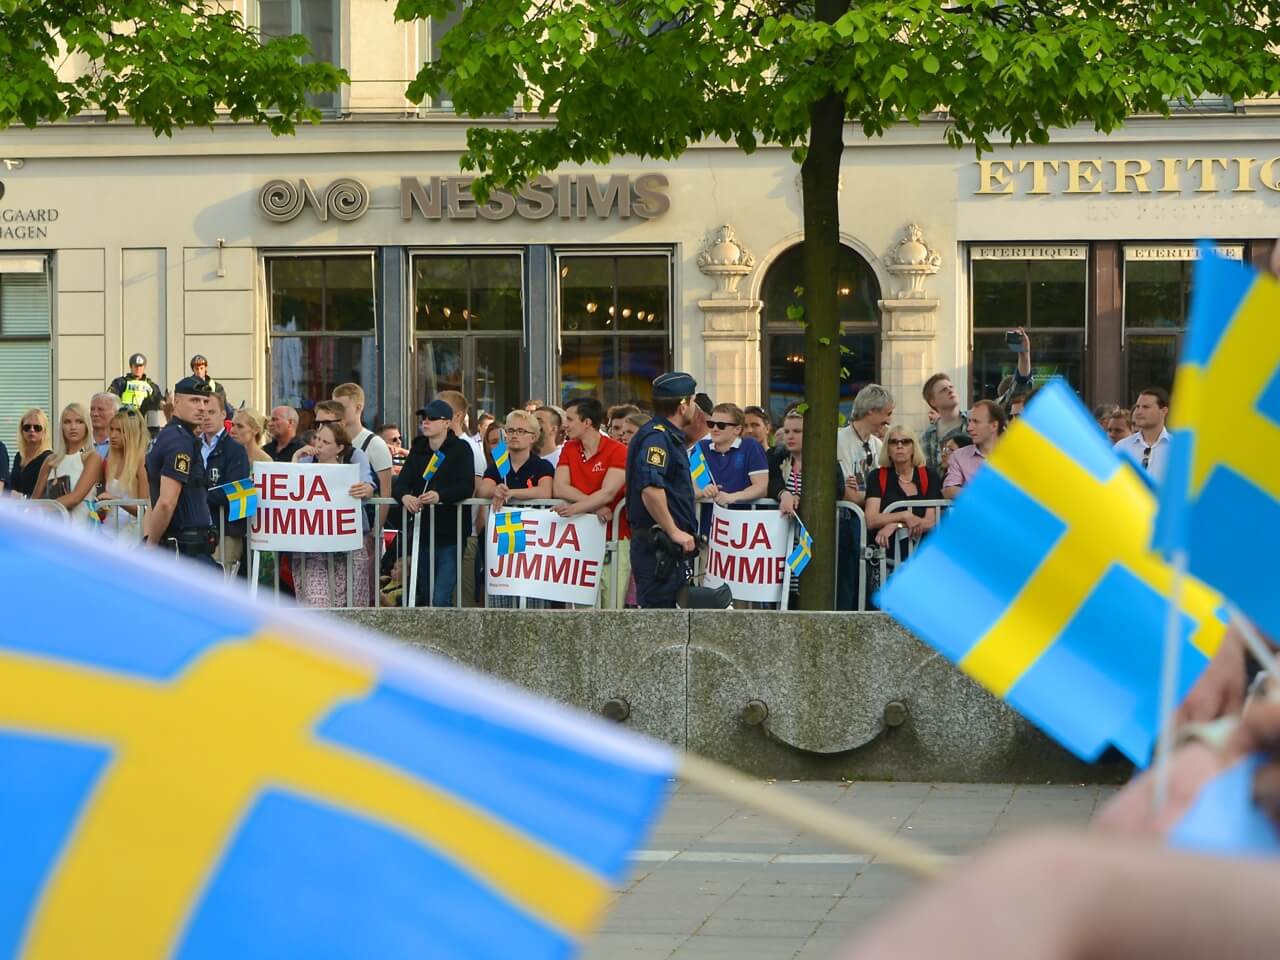 The Sweden Democrats as an Example of the Mainstreamization of the Far Right